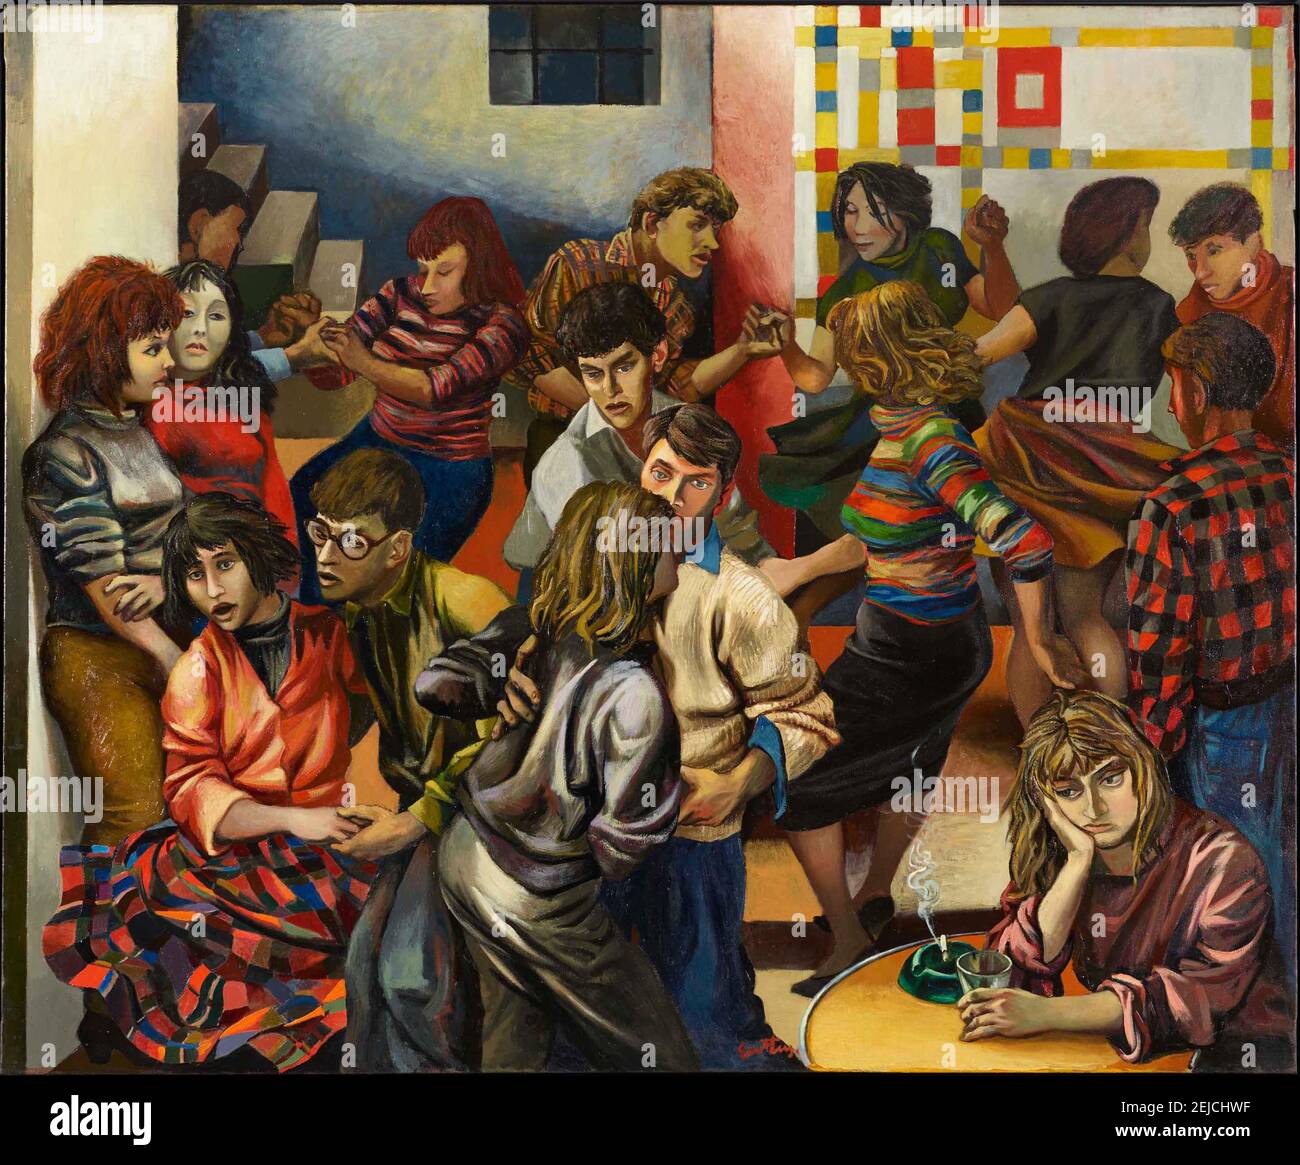 Boogie woogie. Museum: PRIVATE COLLECTION. Author: RENATO GUTTUSO. Stock Photo